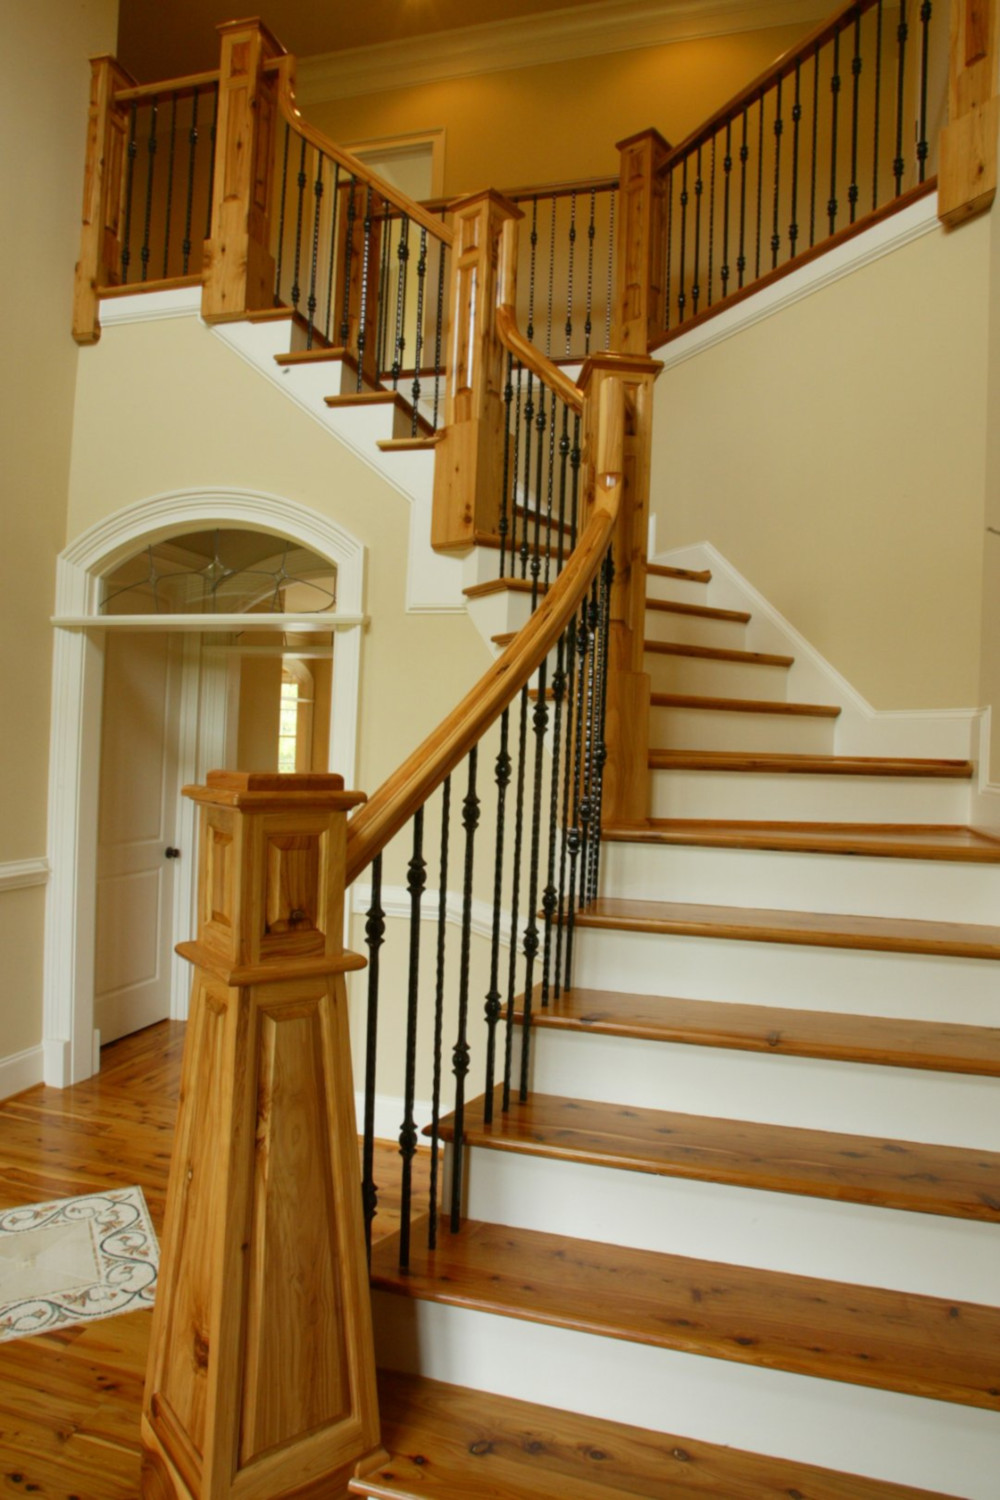 Curved wooden stairs